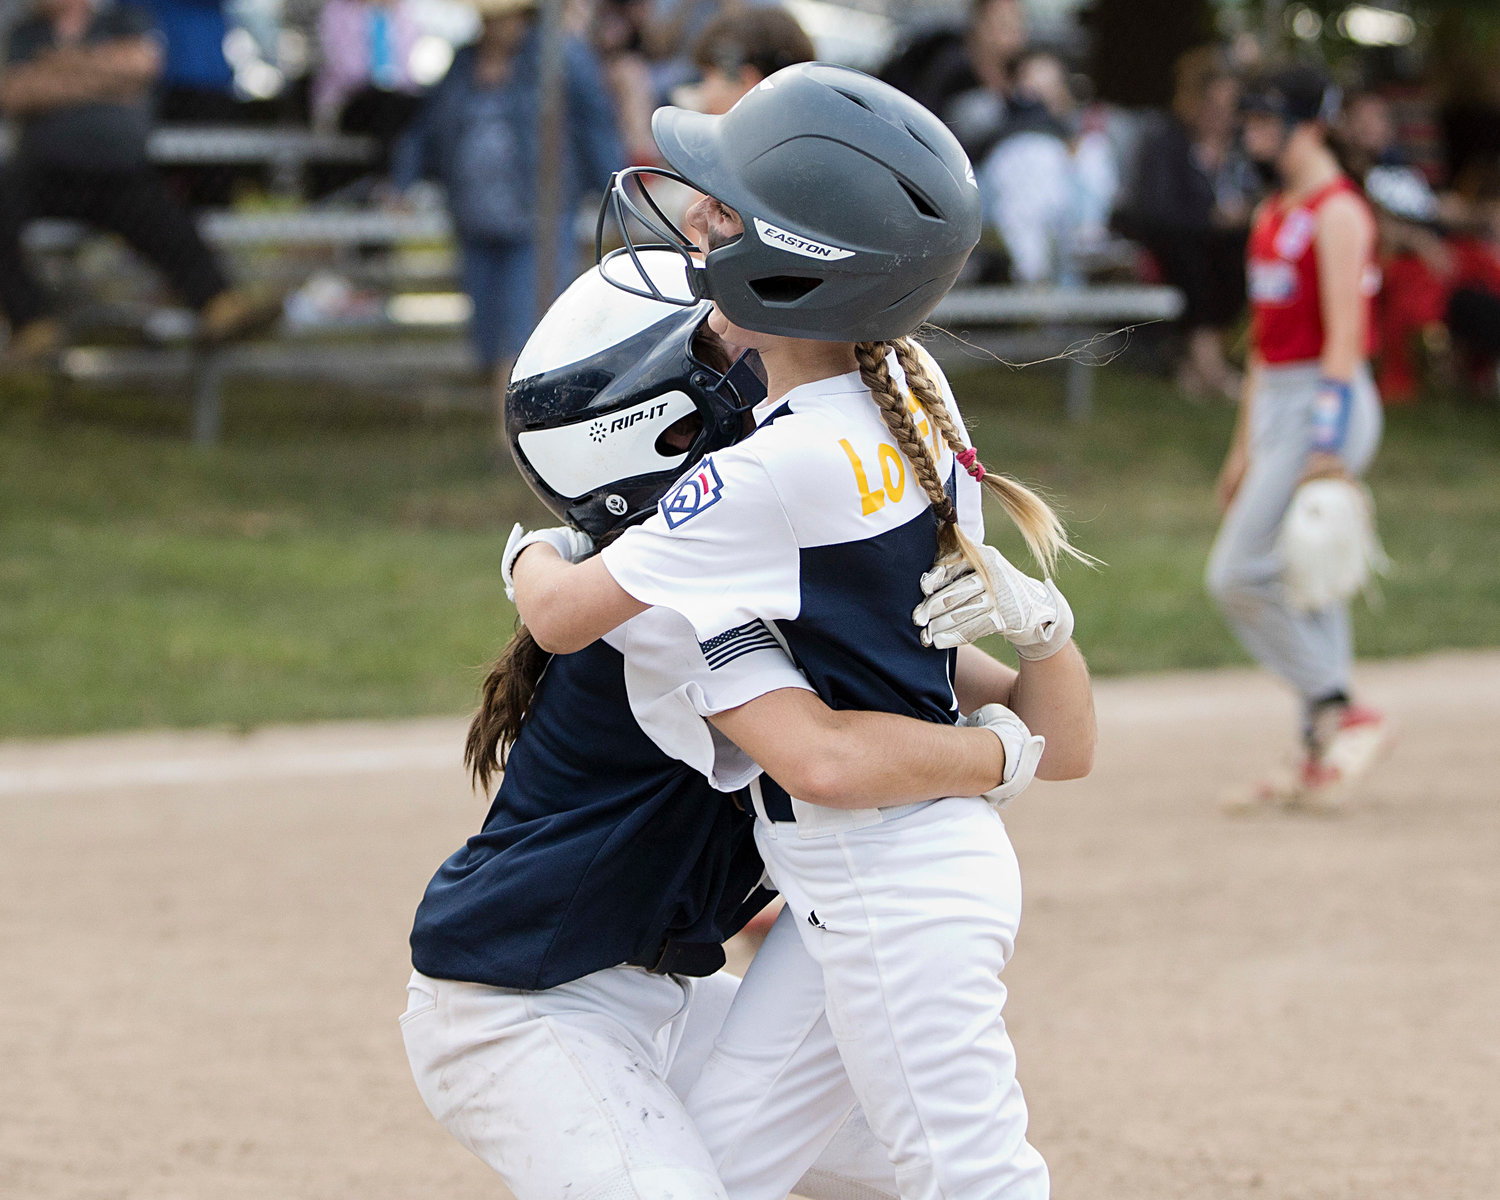 Keira Martin (left) hugs Sky LoVerme after Sky drove in the winning run in the bottom of the sixth inning the District 2 Championship All-Star game on Friday night.